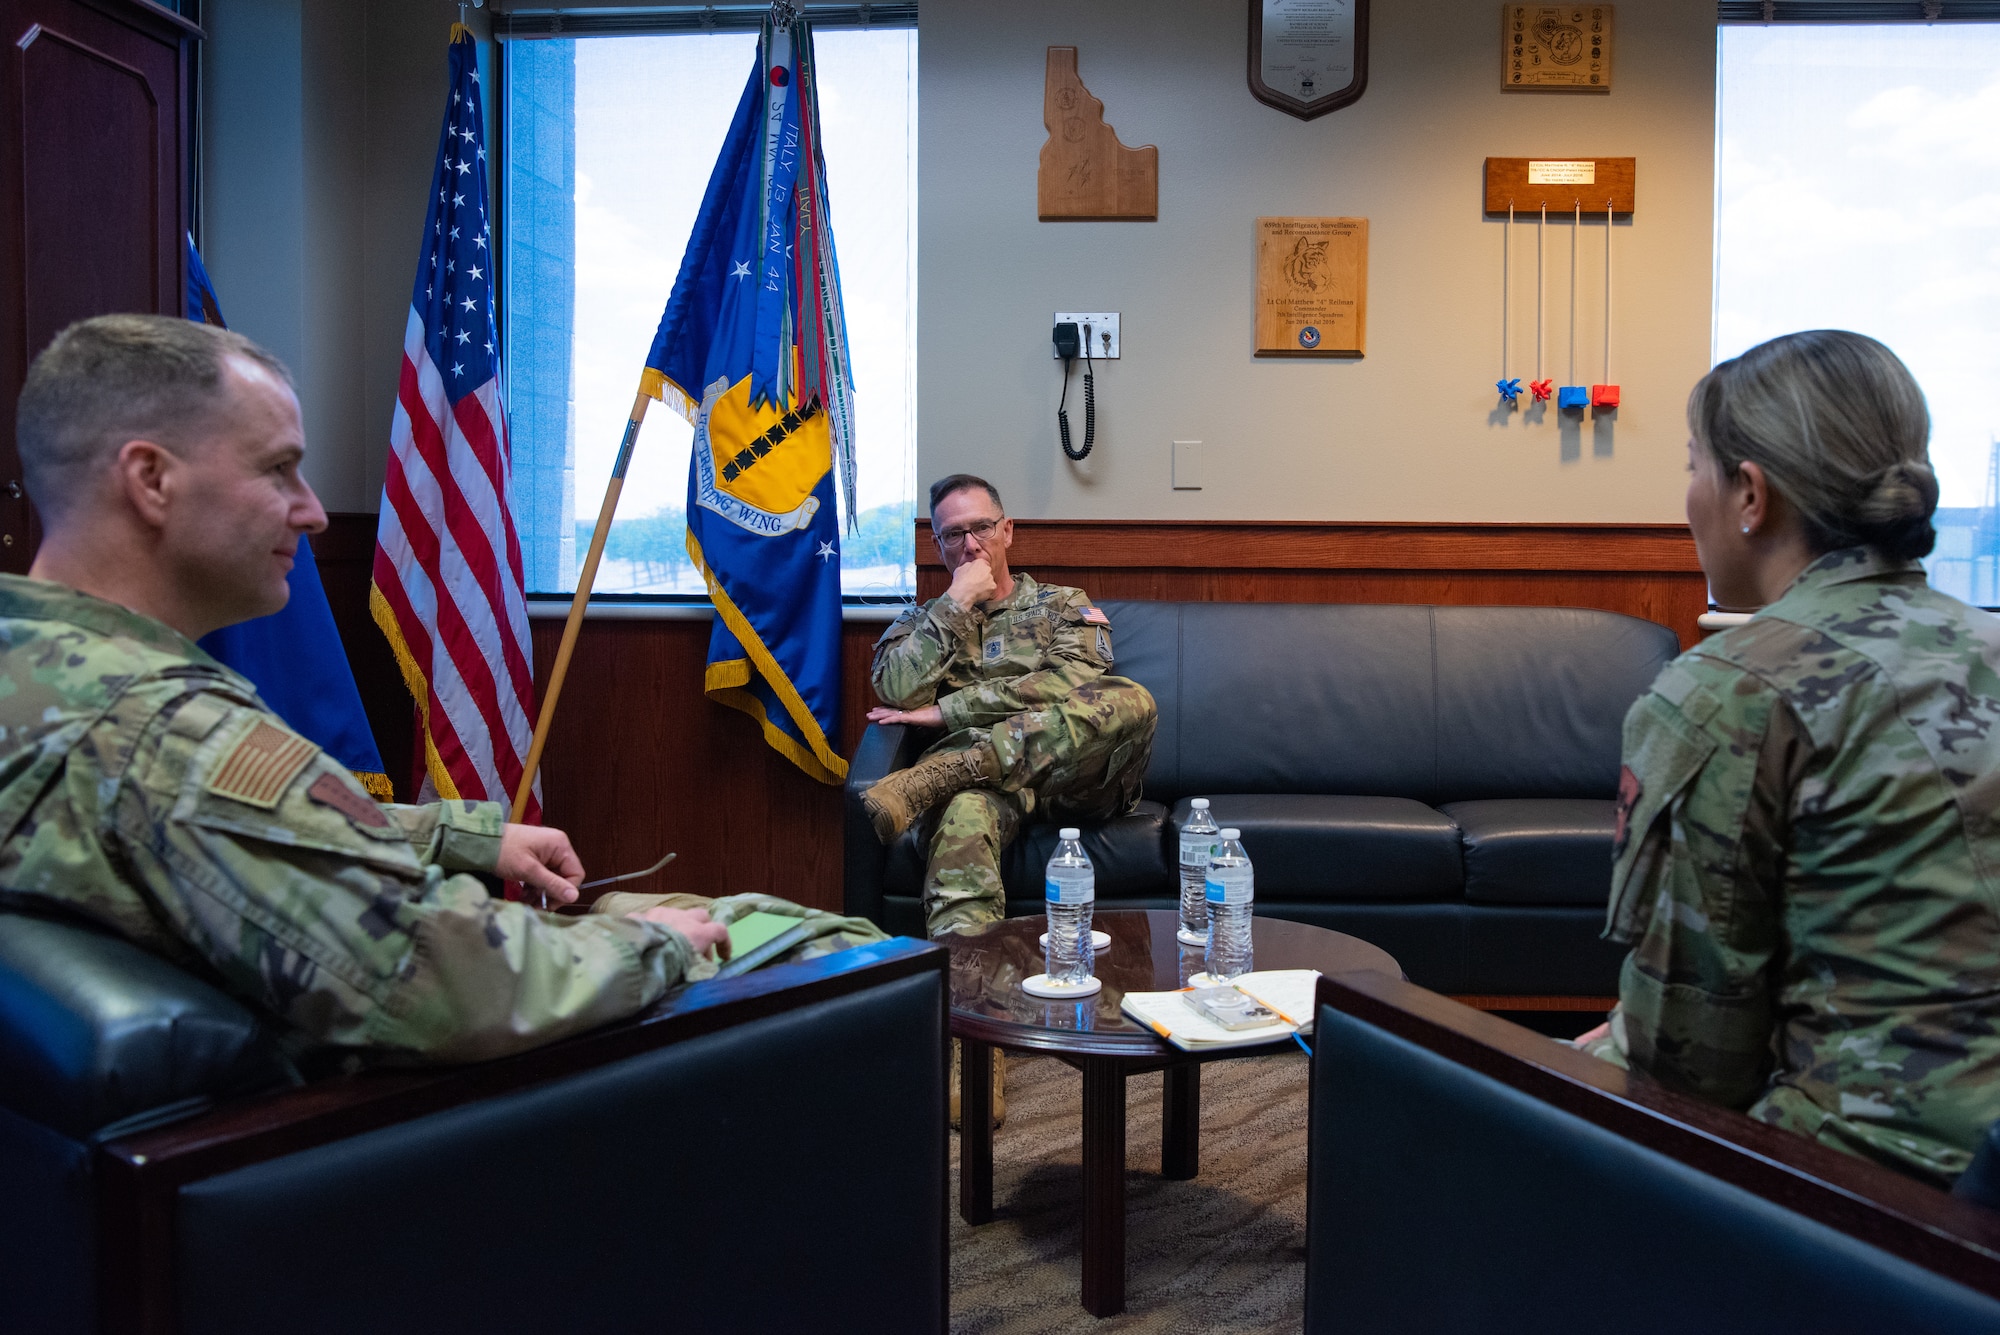 Chief Master Sergeant of the Space Force Roger A. Towberman sits in a briefing with Col. Christopher Corbett, 17th Training Wing vice commander, and Chief Master Sergeant Rebecca Arbona, 17th Training Wing command chief, at Goodfellow Air Force Base, Texas, July 8, 2022. Towberman expressed his appreciation for the wing’s contribution to Space Force intelligence training. (U.S. Air Force photo by Senior Airman Michael Bowman)